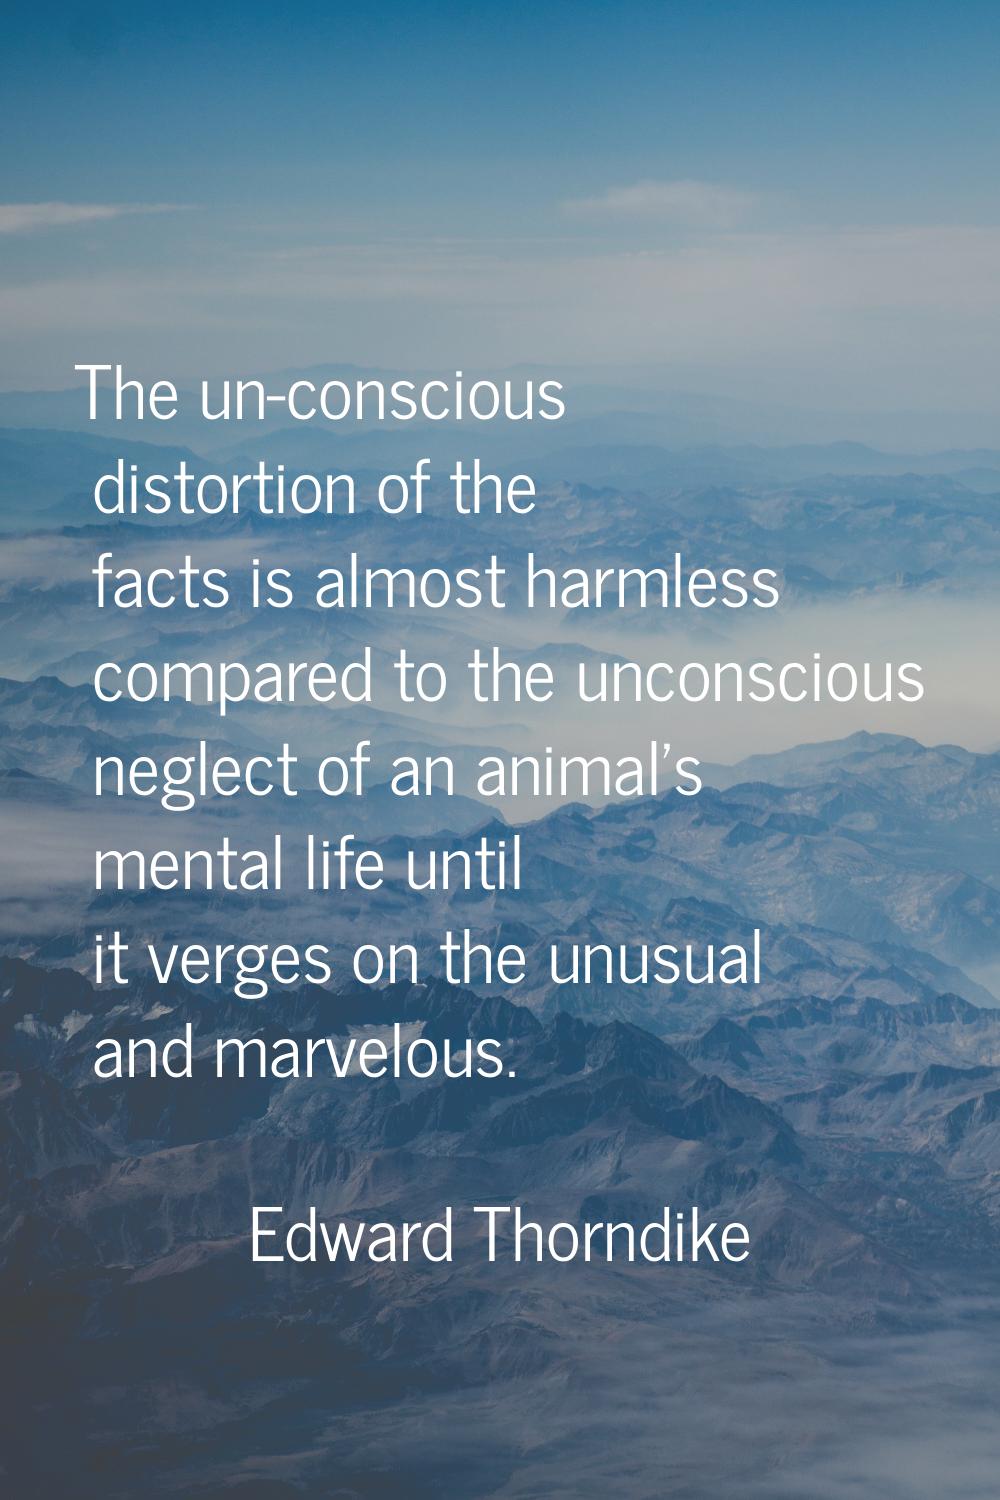 The un-conscious distortion of the facts is almost harmless compared to the unconscious neglect of 